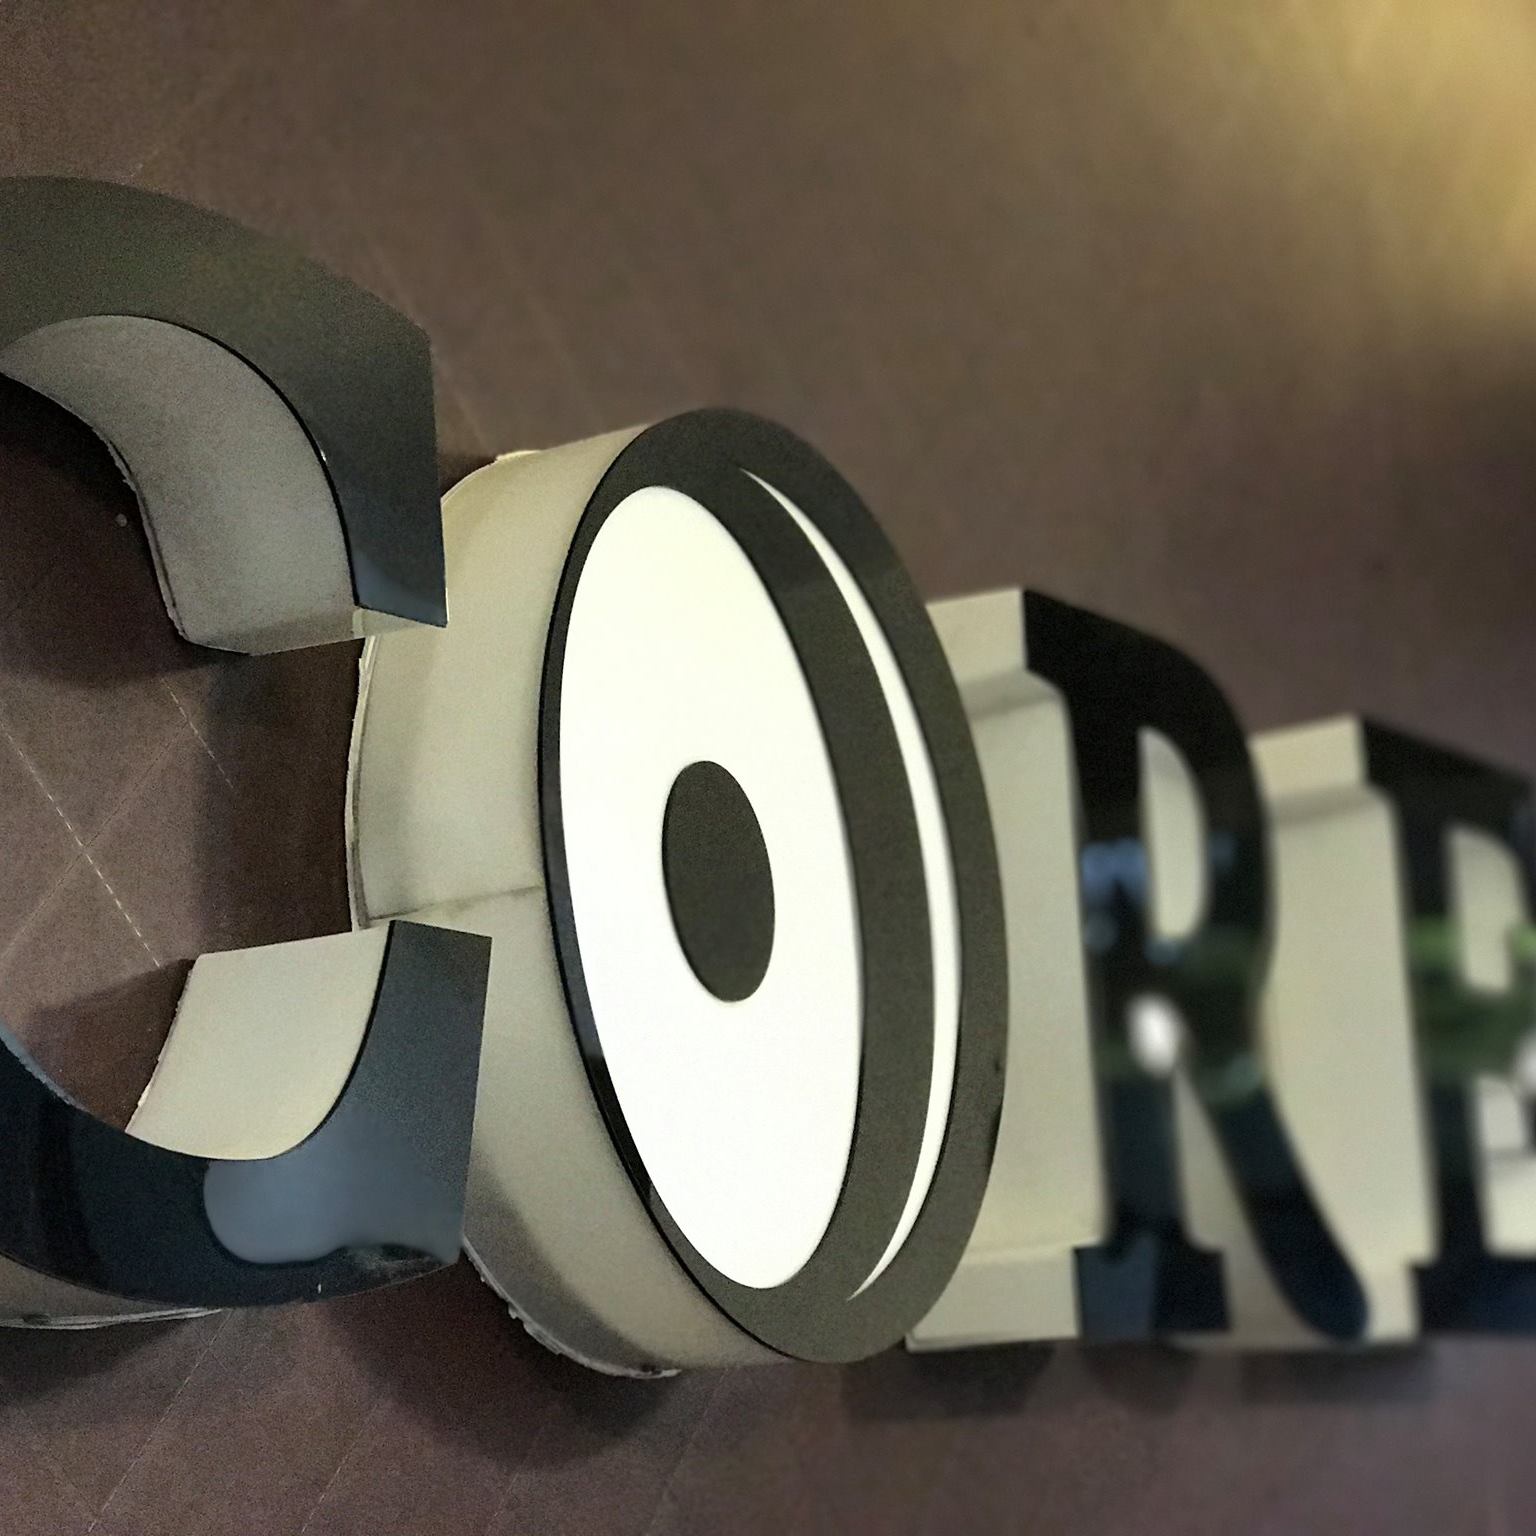 CORE GYM AND FITNESS CENTER Logo